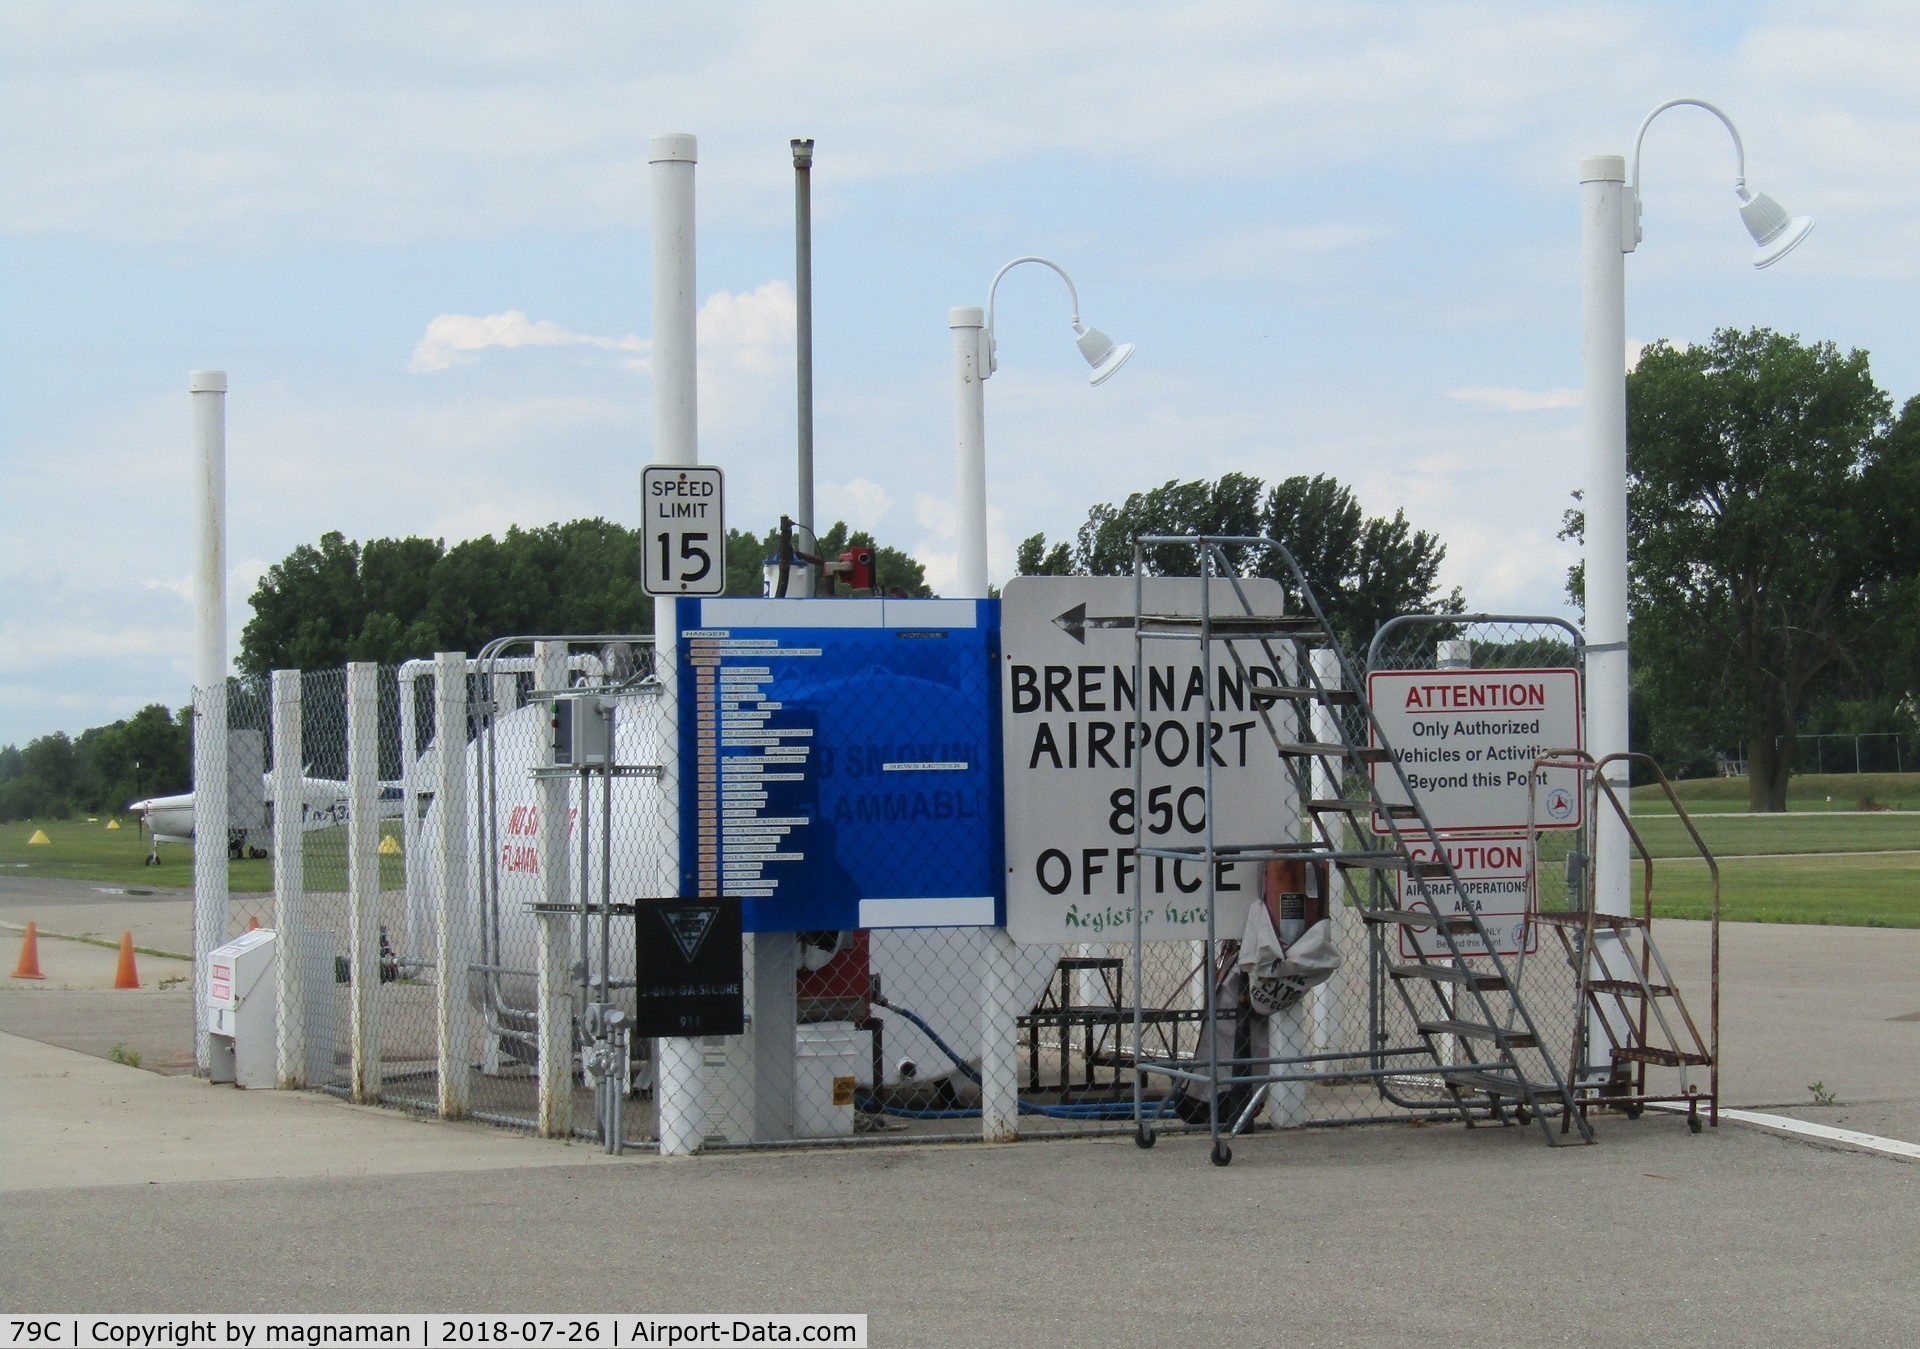 Brennand Airport (79C) - Fuel depot at a very friendly small strip near Oshkosh. Thanks for great but brief visit.